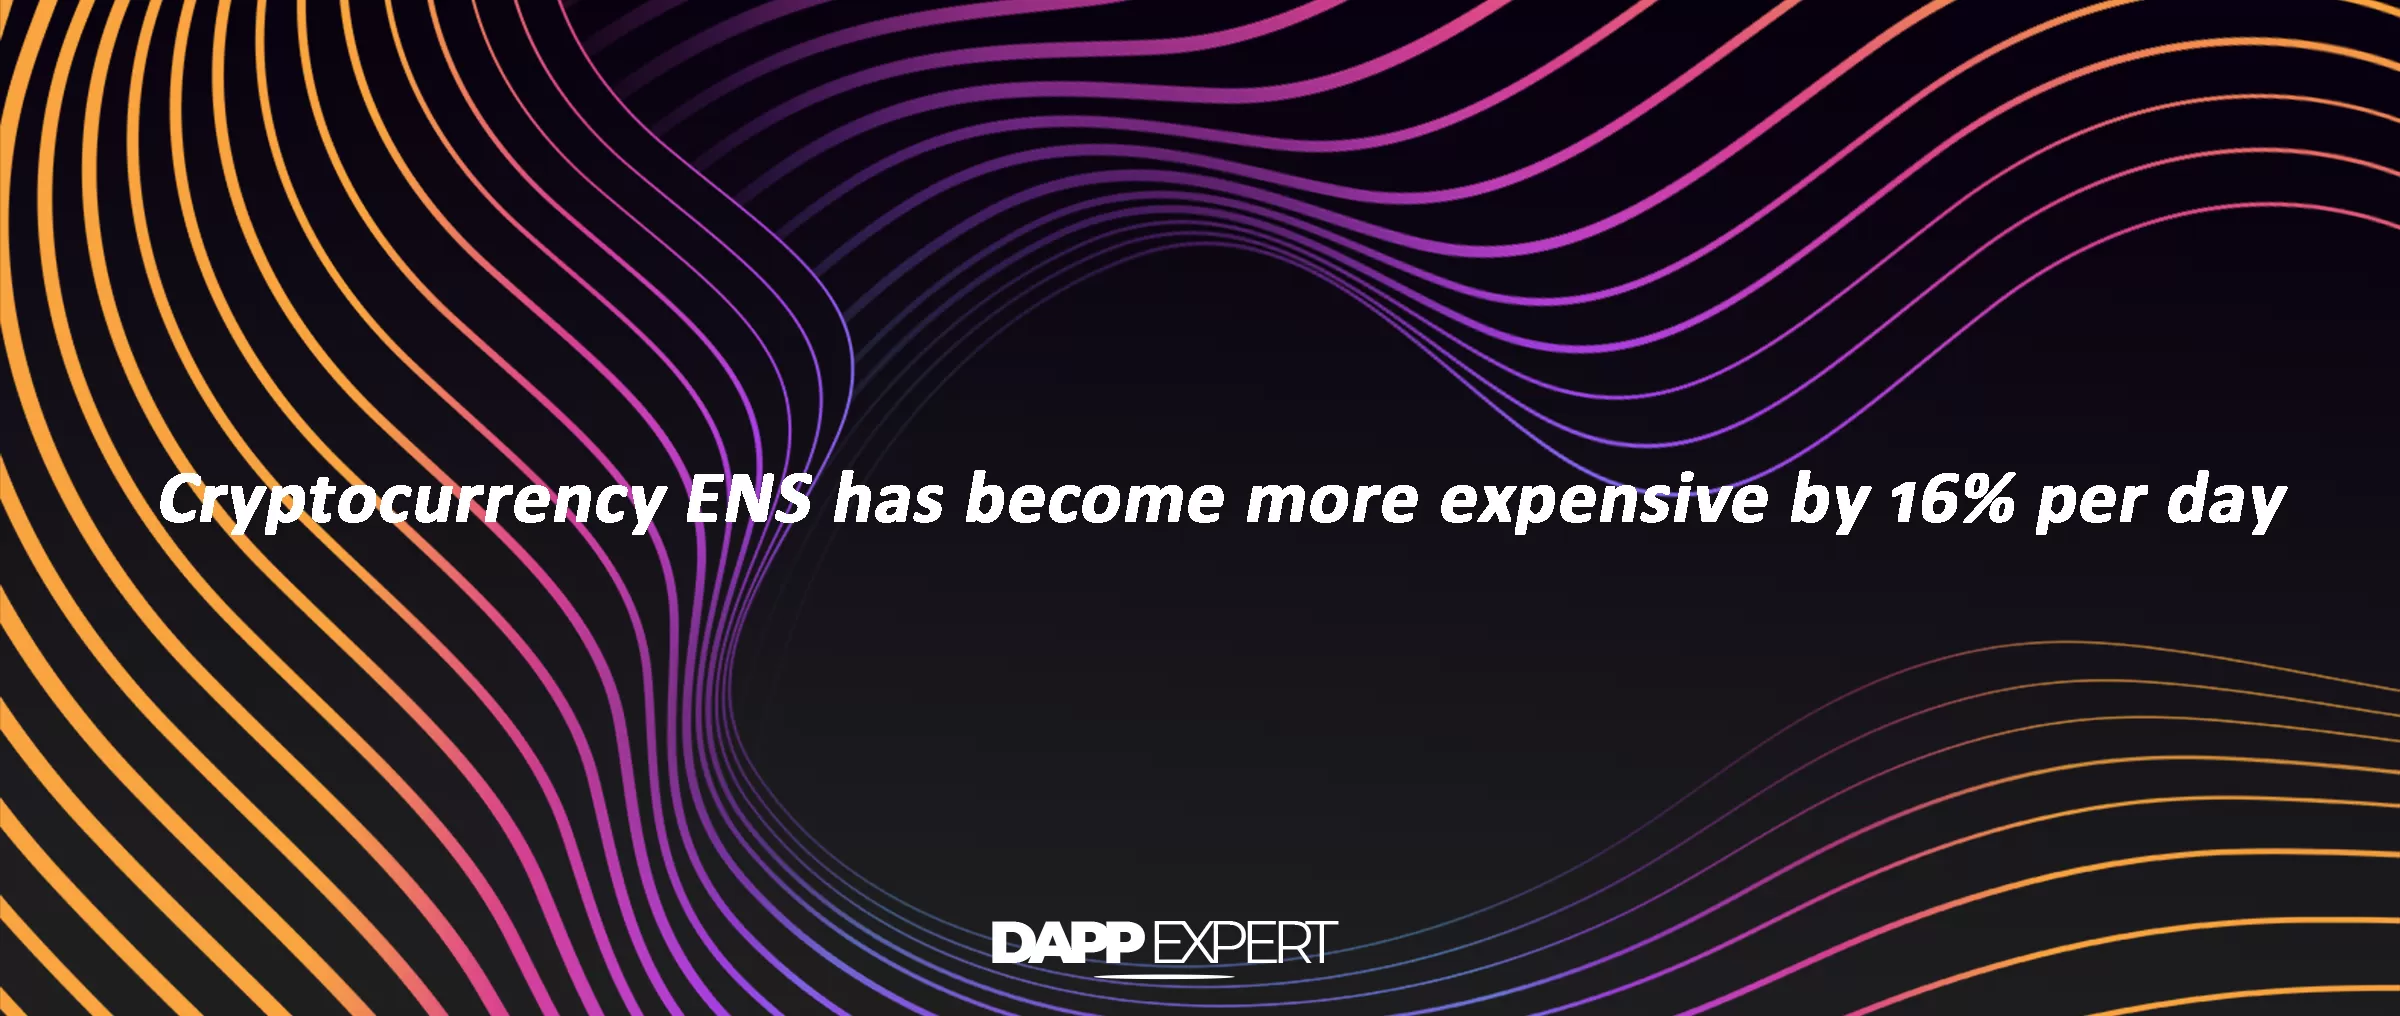 Cryptocurrency ENS has become more expensive by 16% per day